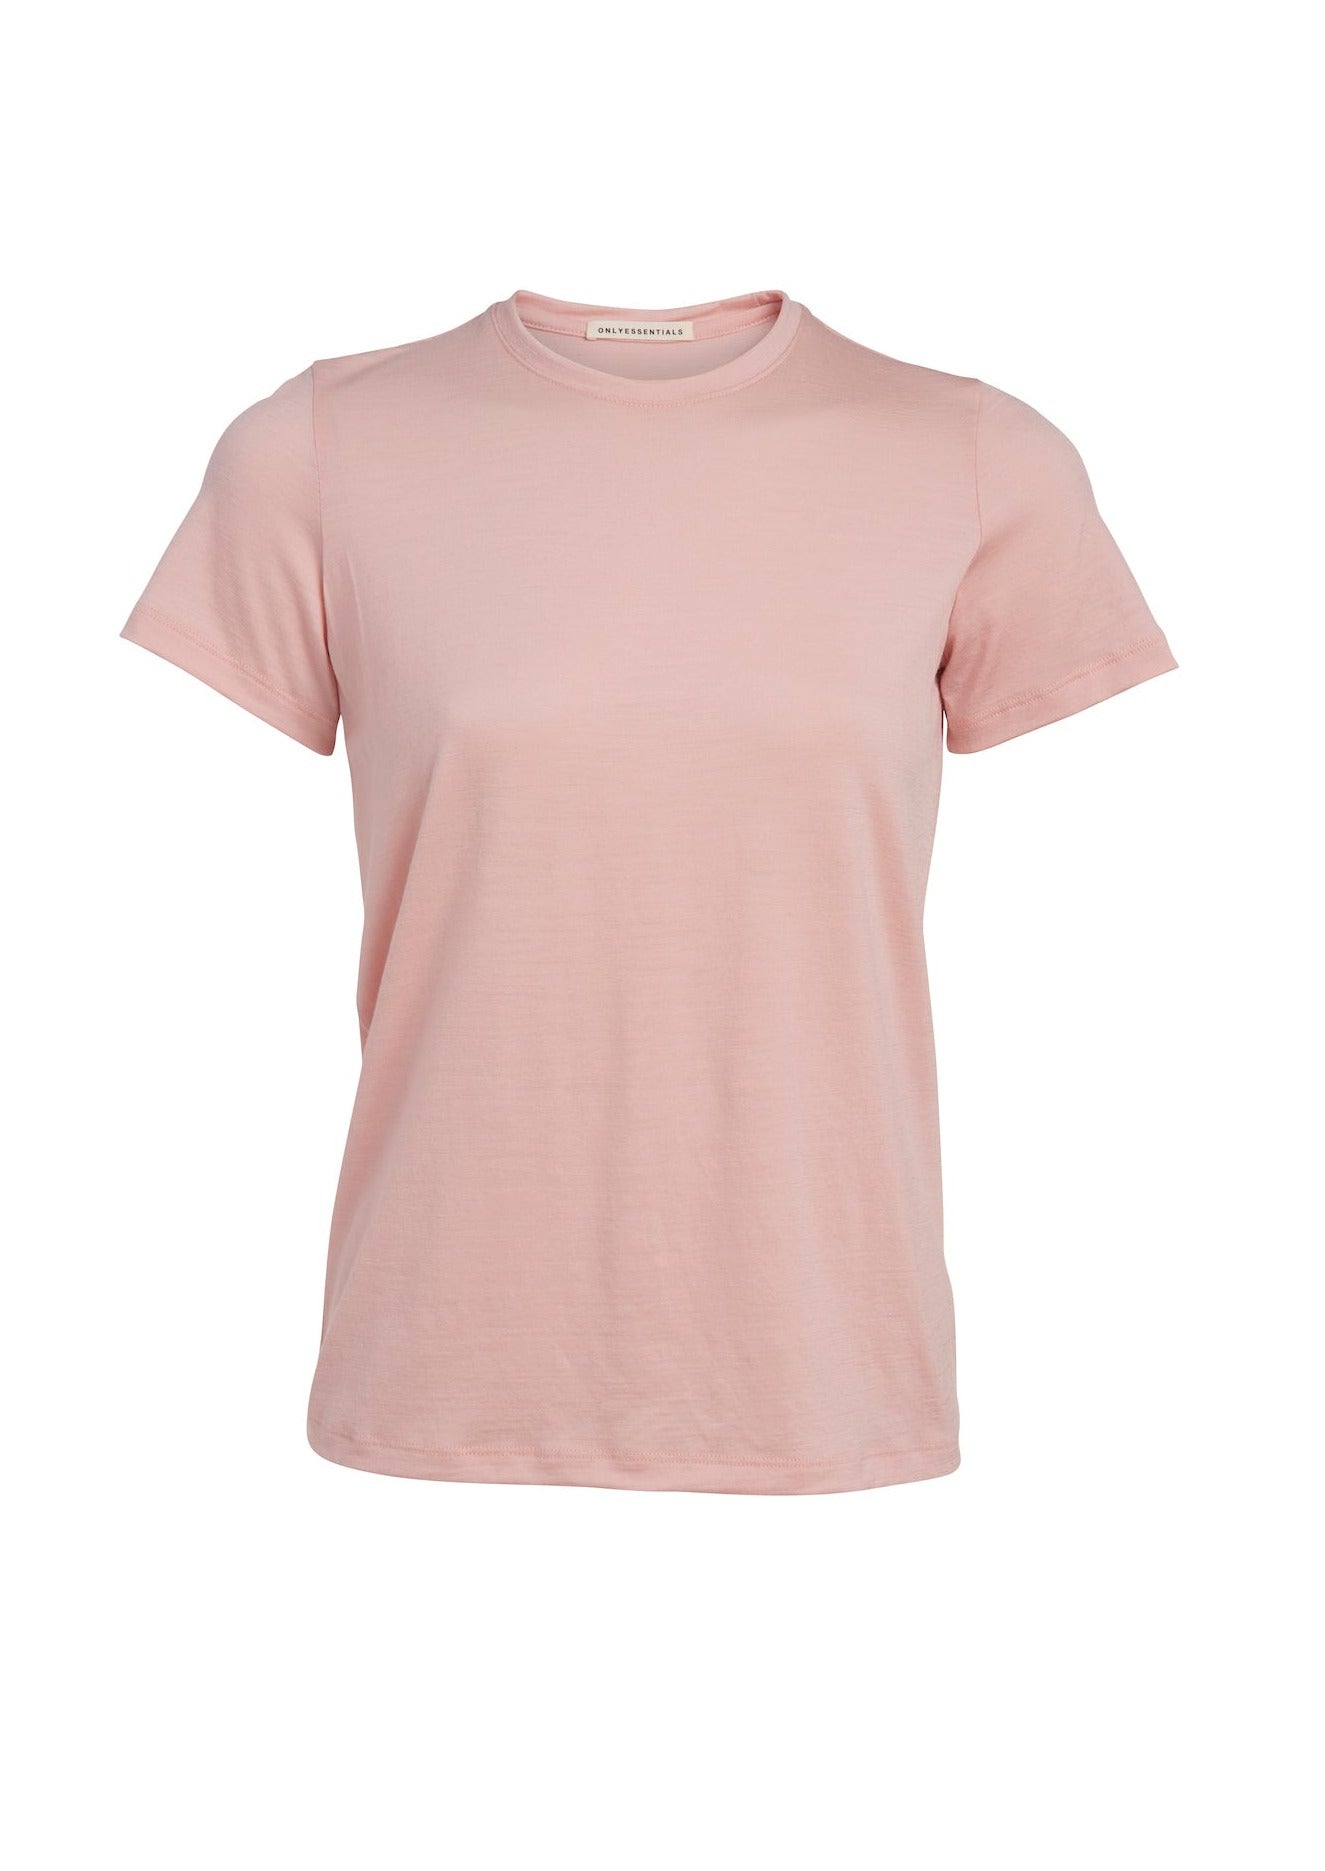 An elevated essential, this classic t-shirt made in New Zealand from 100% traceable merino wool is soft and lightweight to wear all seasons.